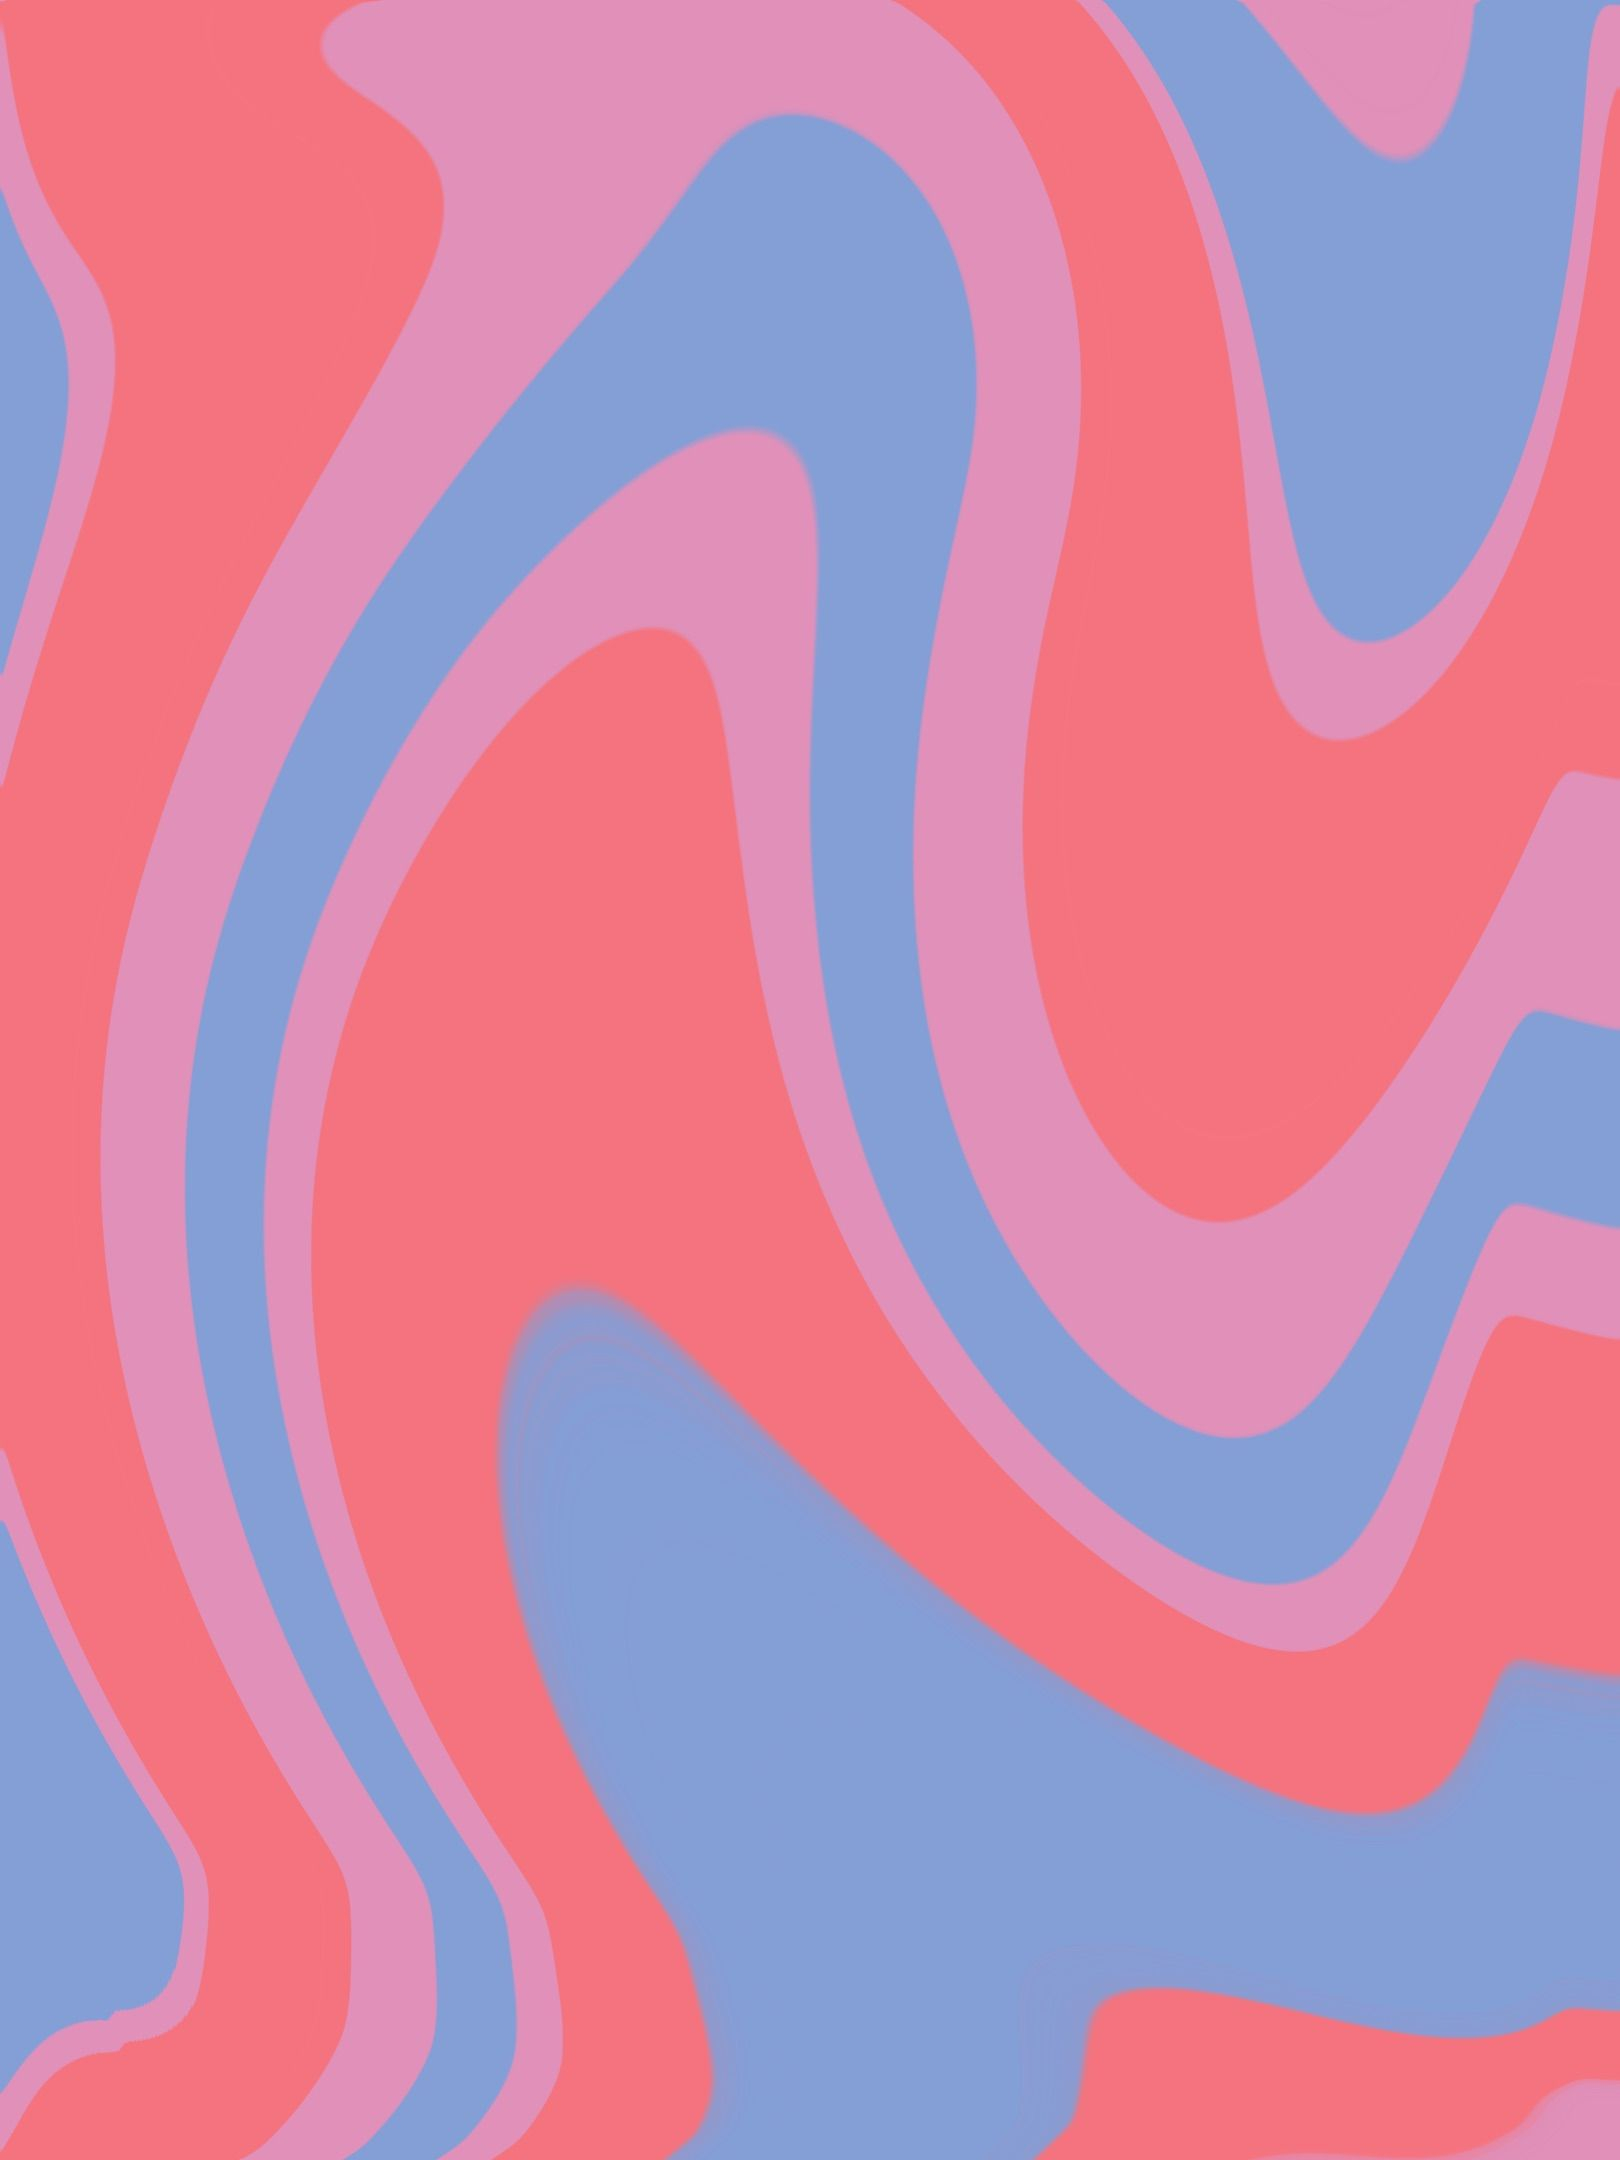 1620x2160 colorful wallpapers | Pink swirls wallpaper, Blue background wallpapers, Blue watercolor wallpaper